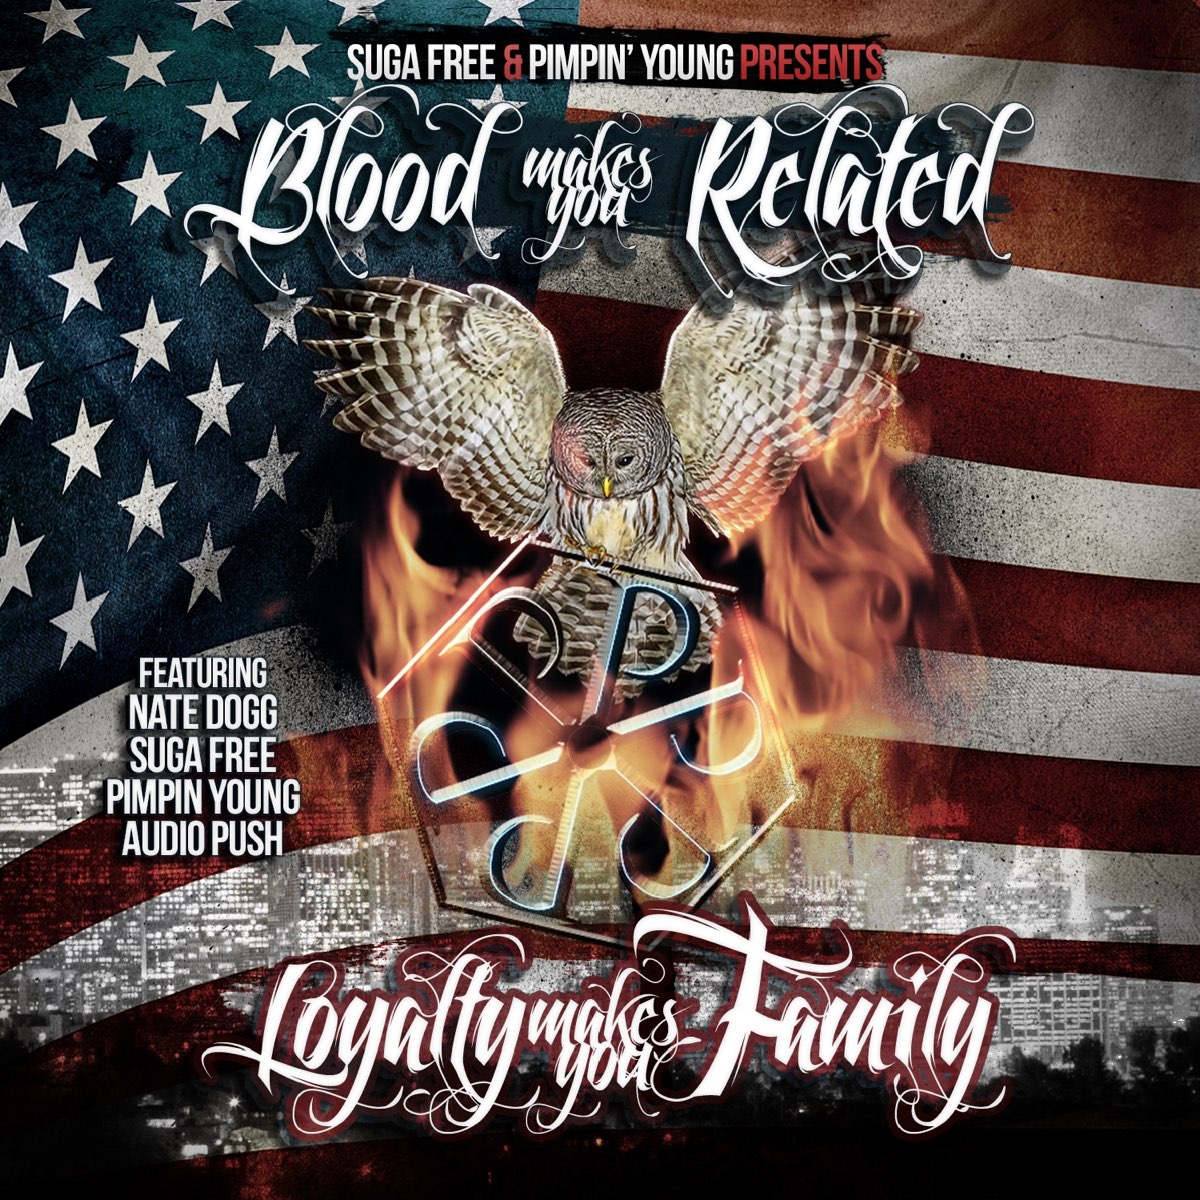 Suga Free & Pimpin Young - Blood Makes You Related, Loyalty Makes You Family - EP